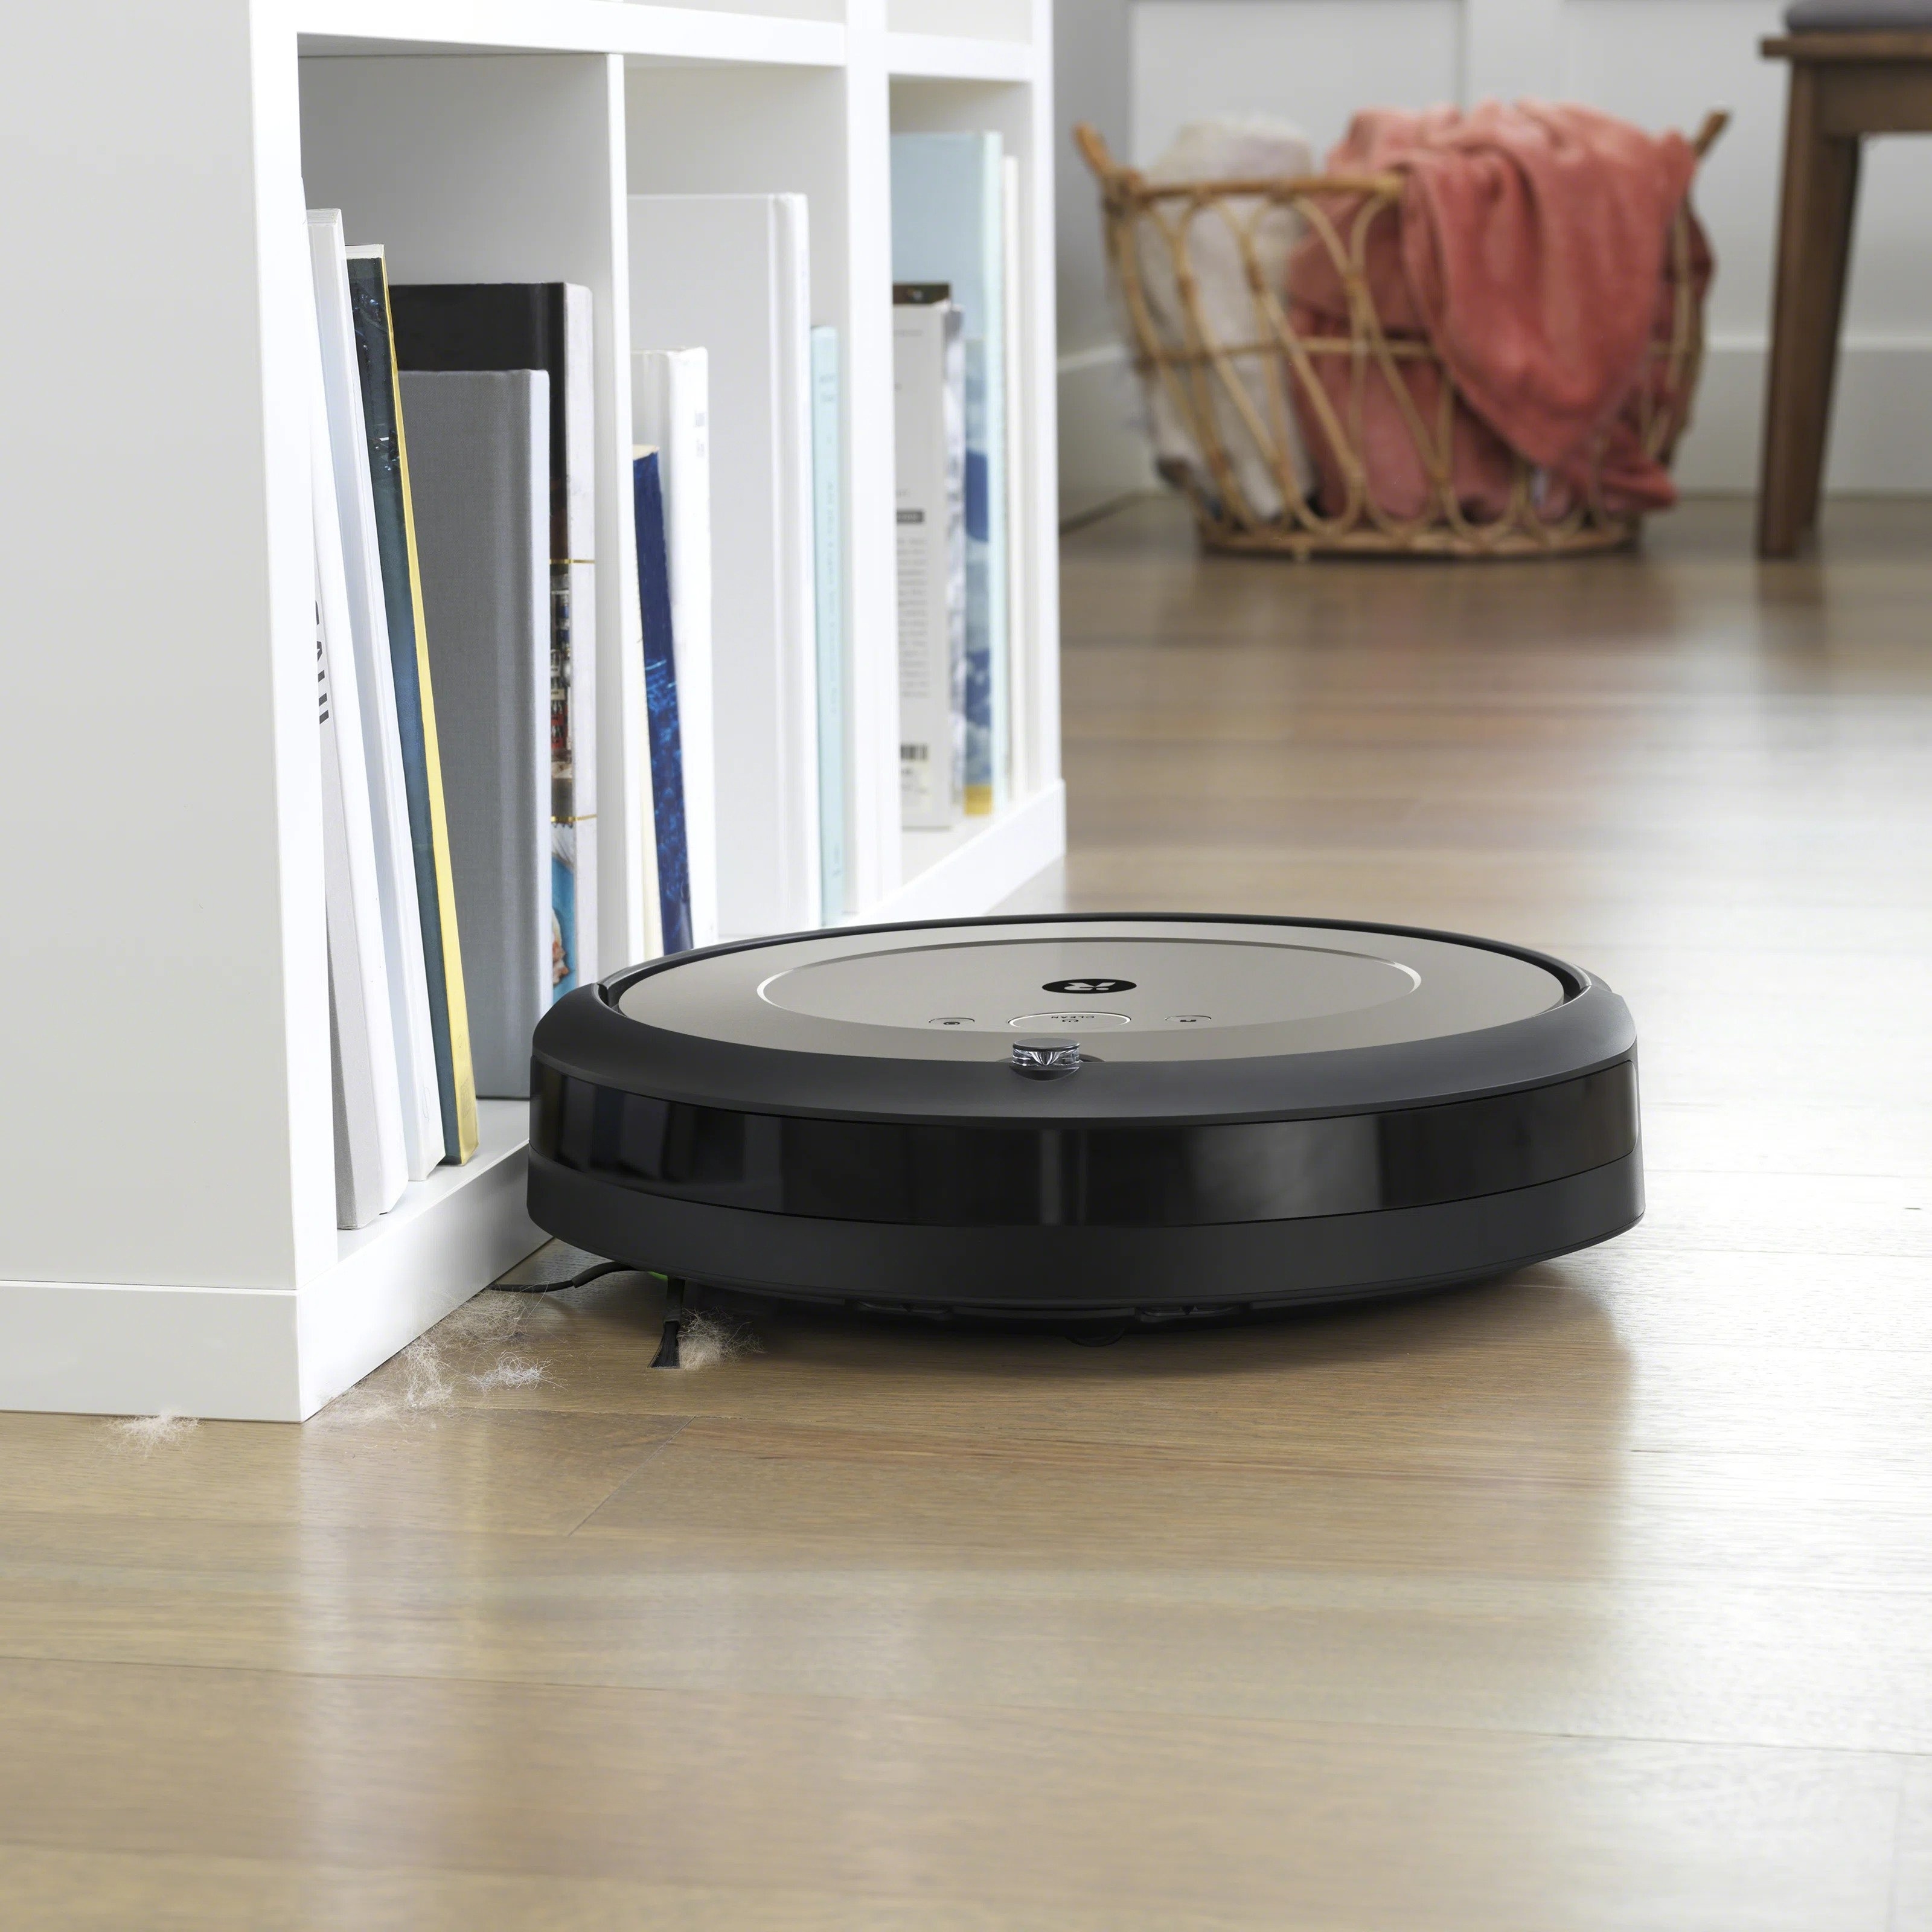 The disc-shaped Roomba on the floor